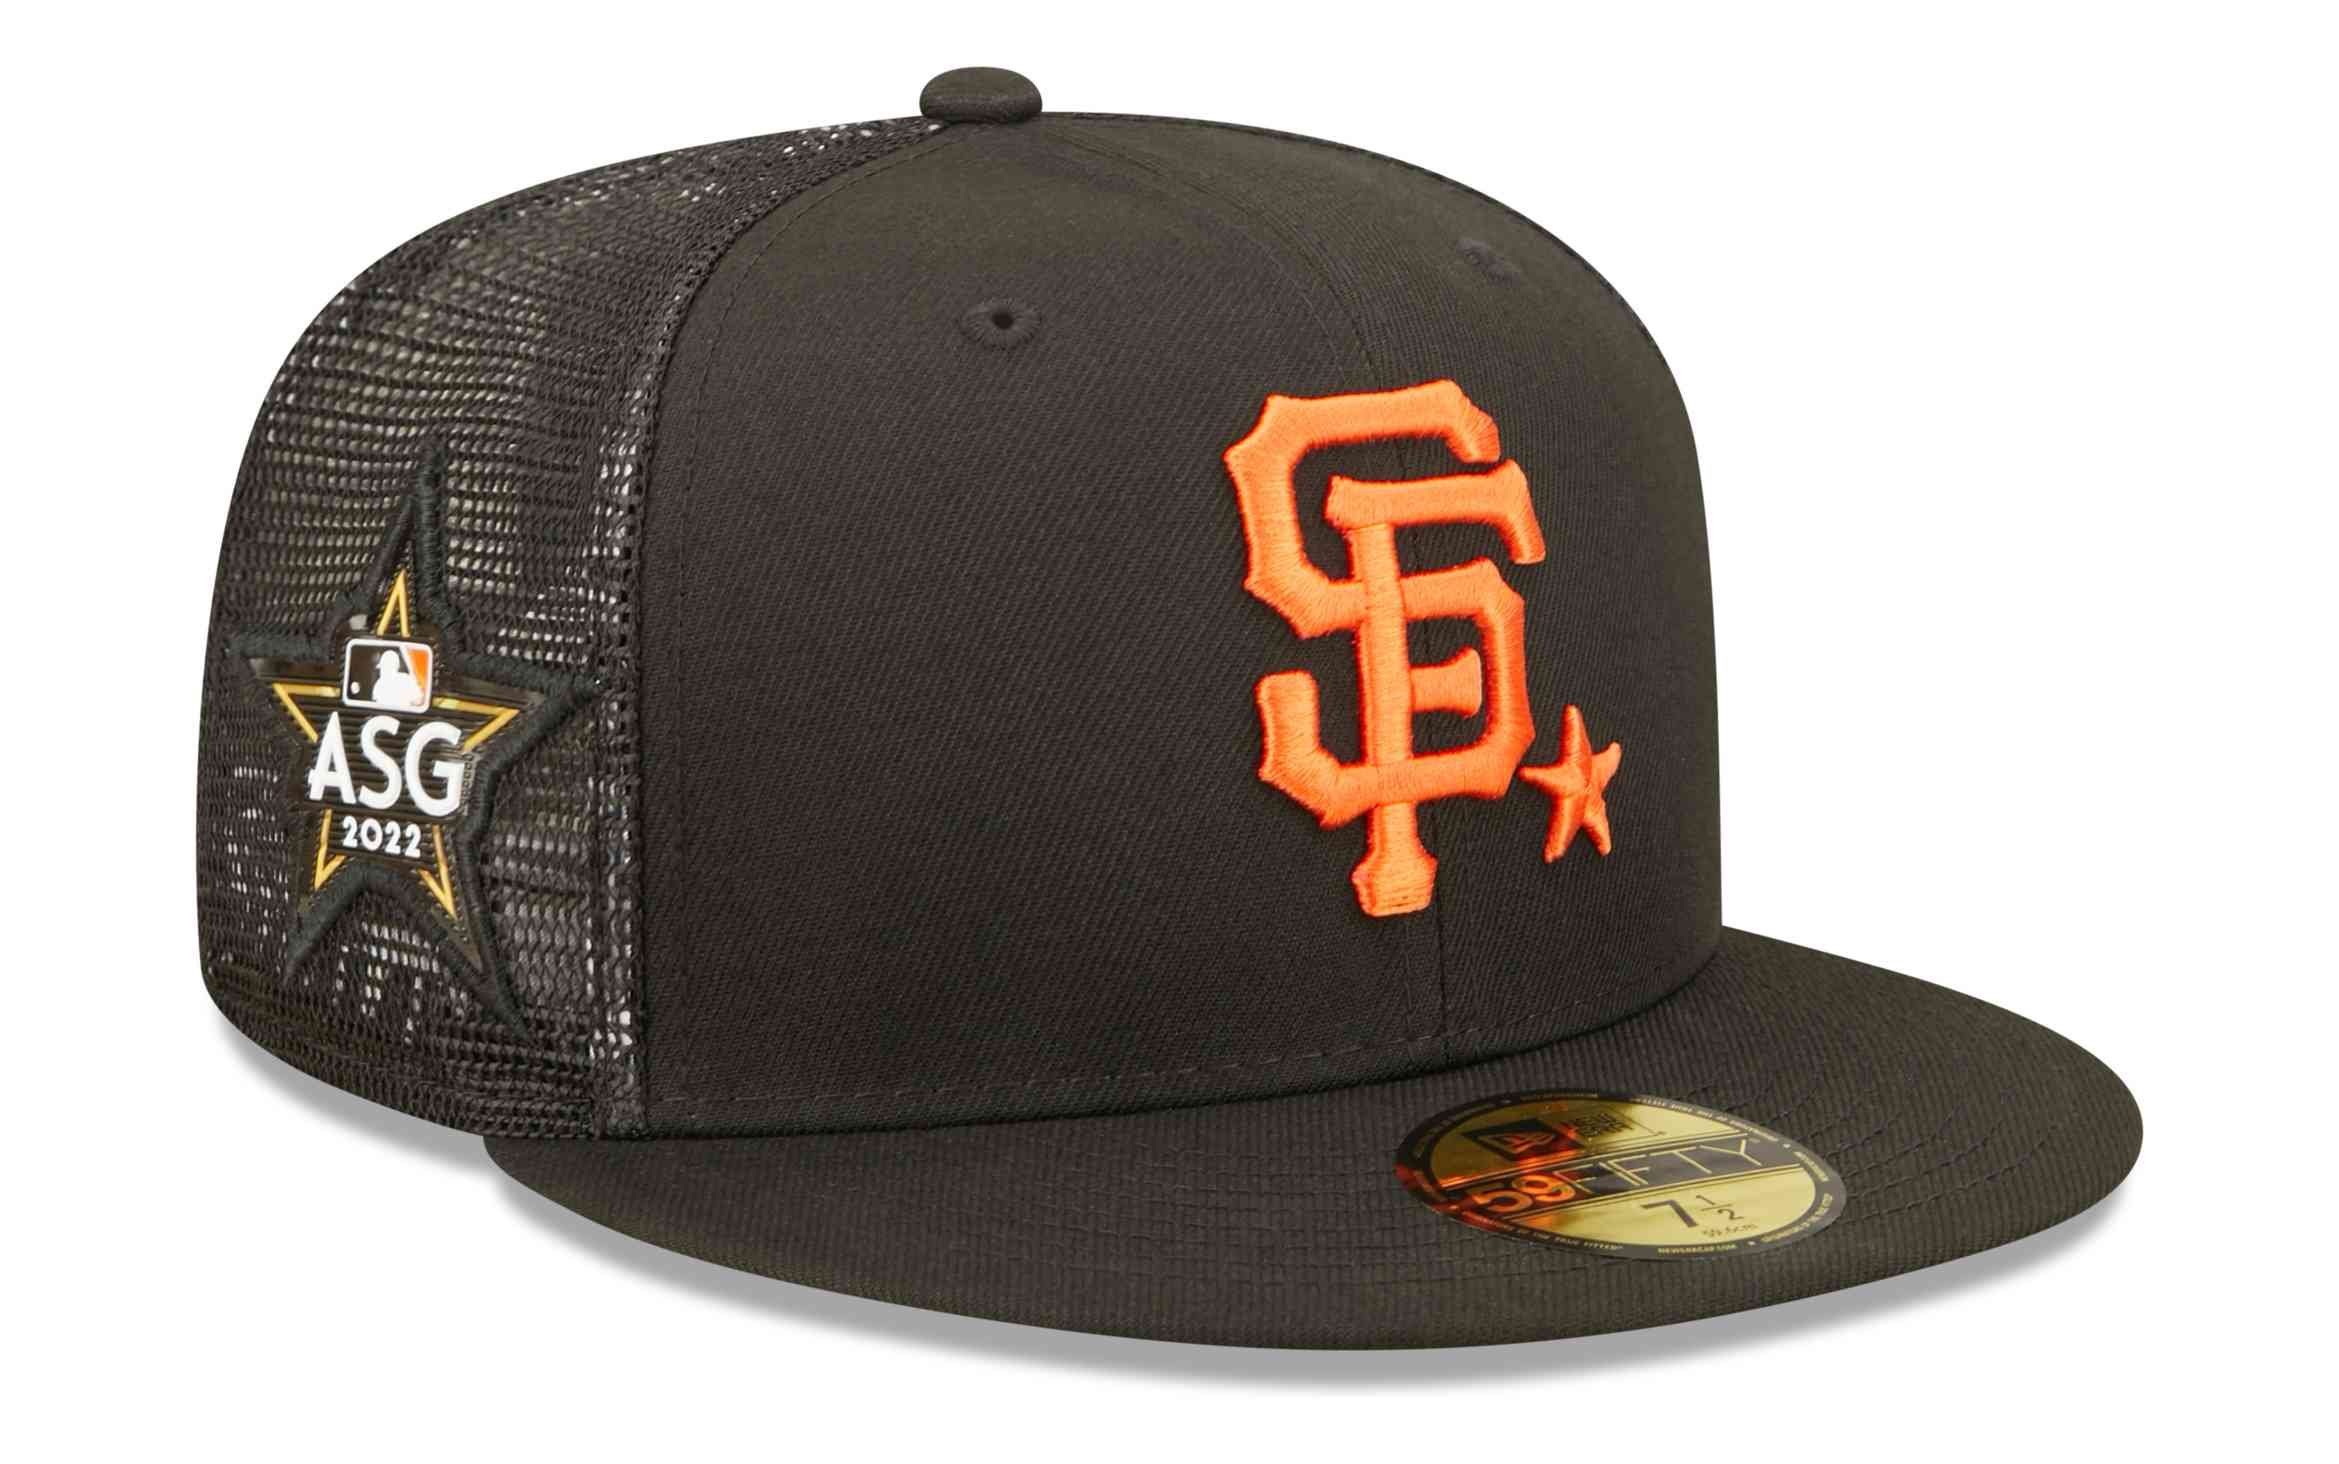 Game San Giants 22 All Star Francisco MLB 59Fifty Cap Era New Fitted